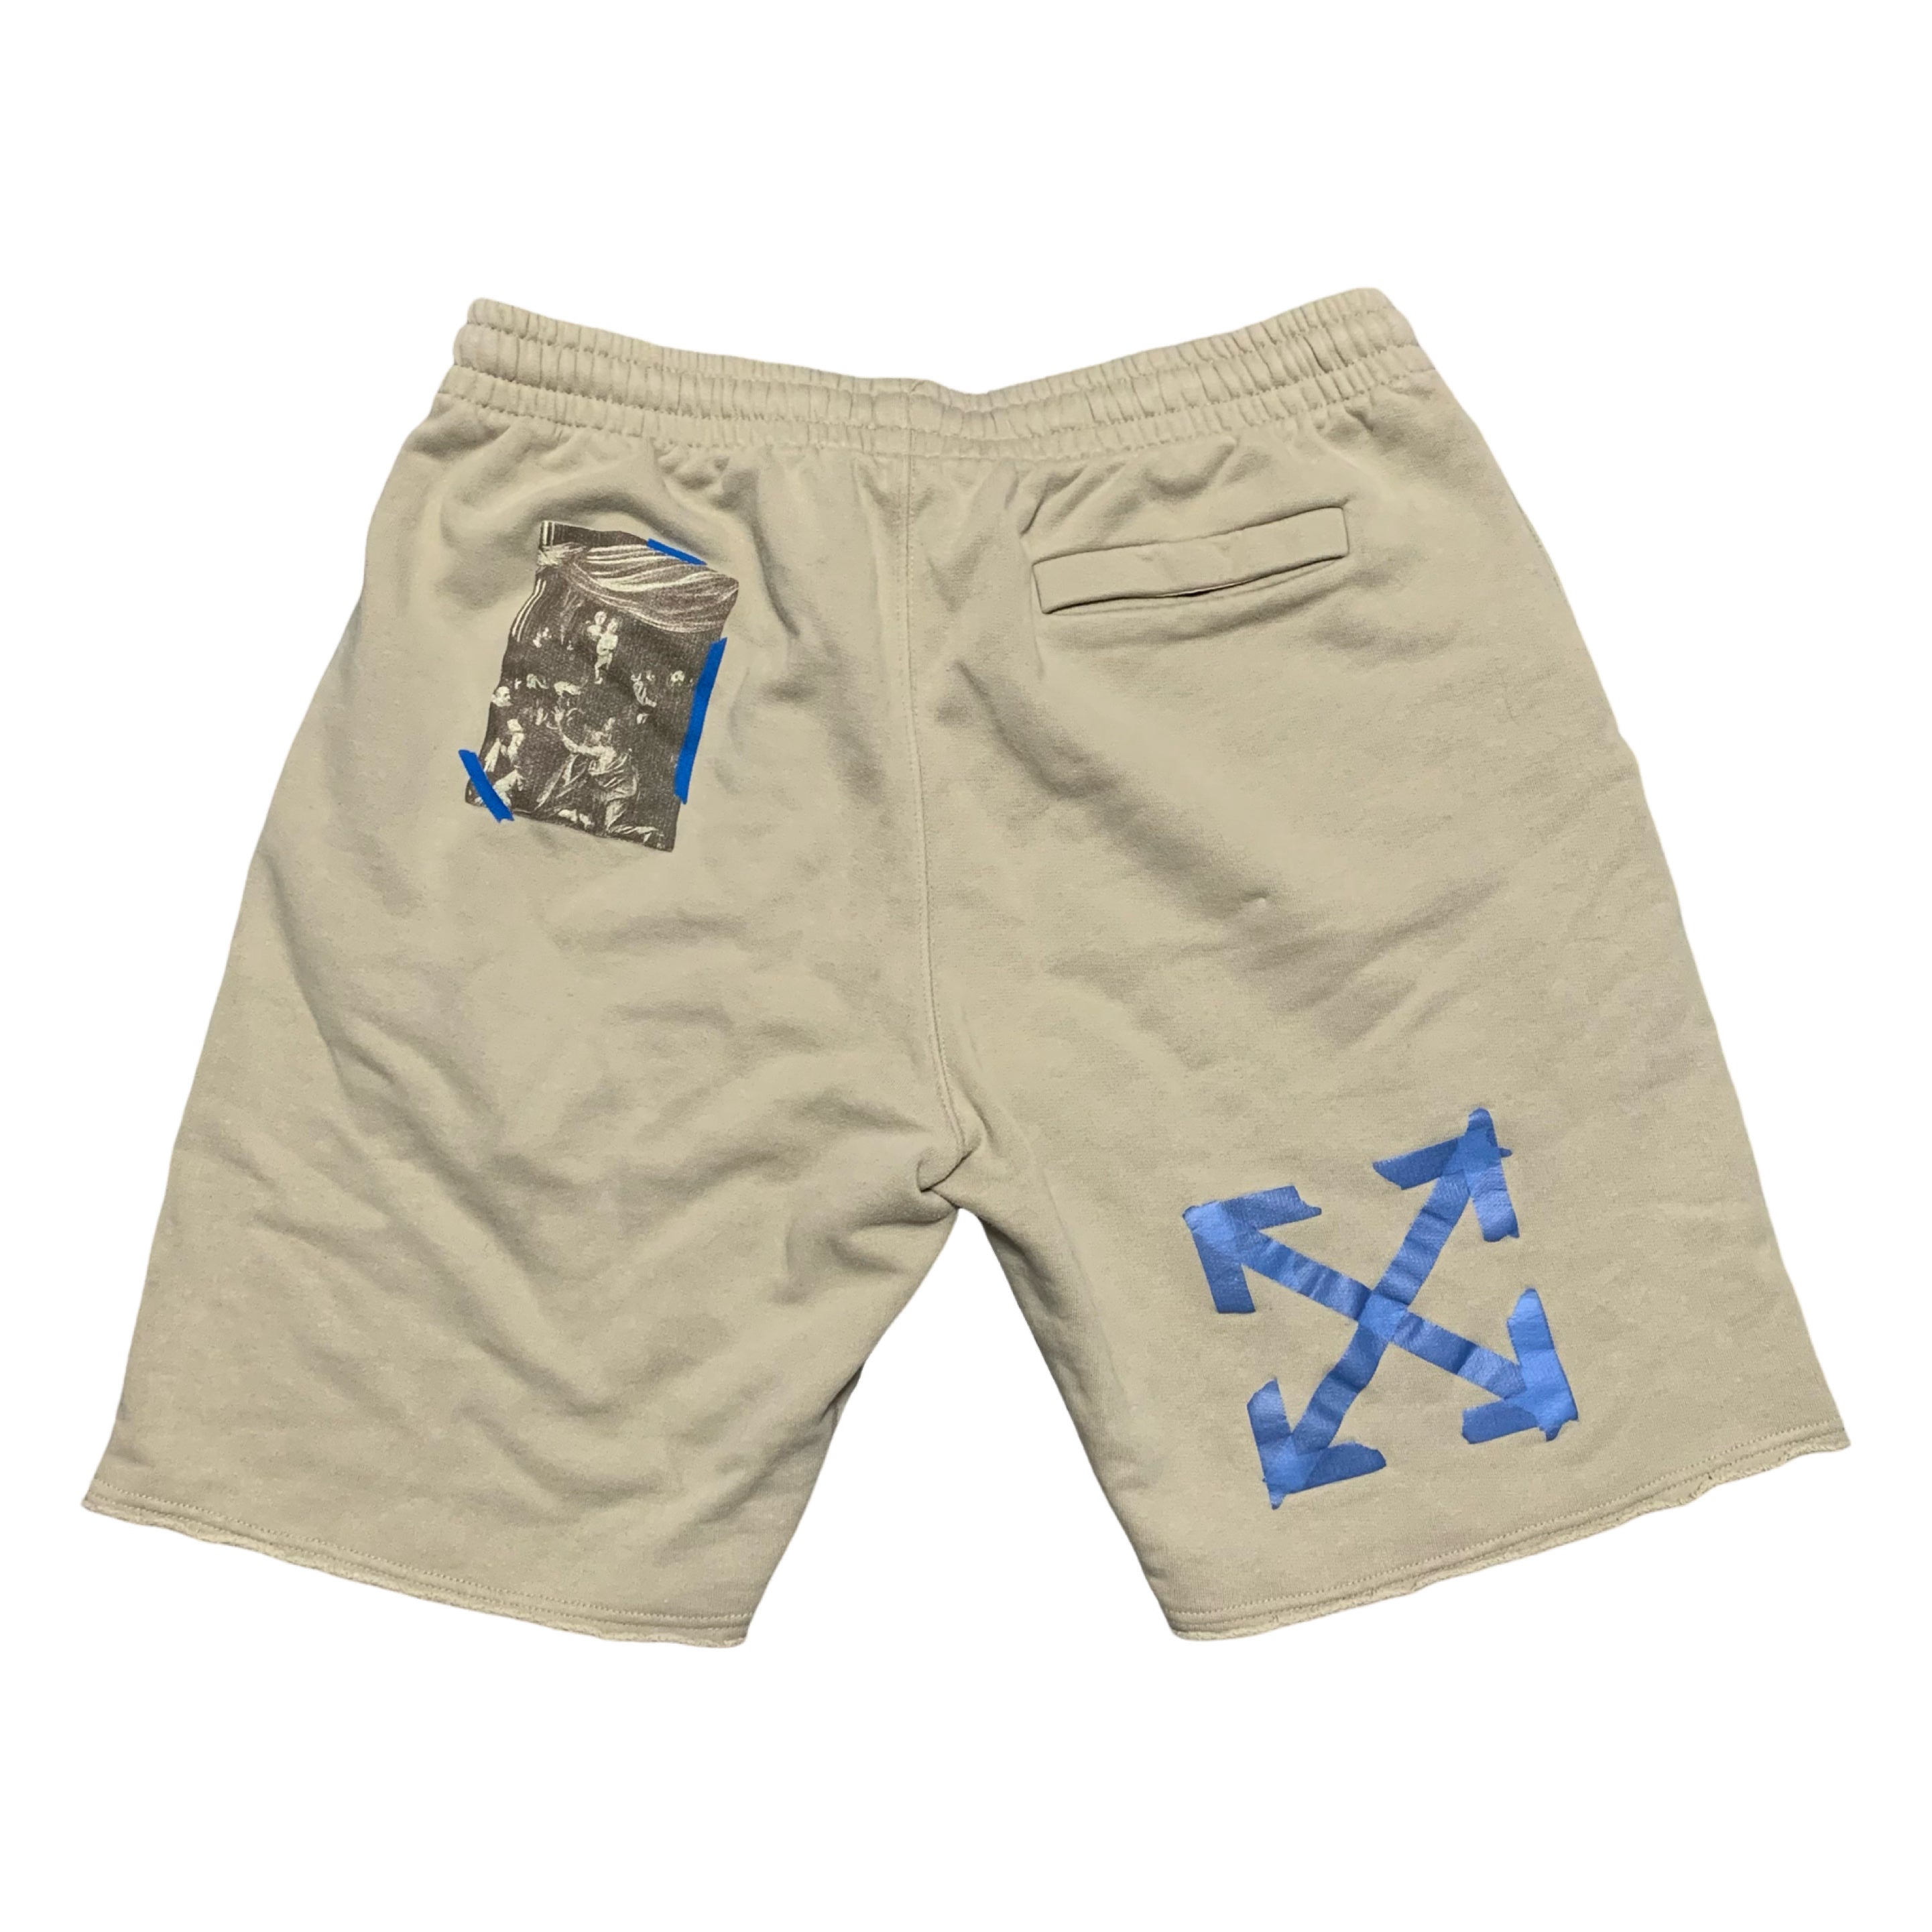 Off White Large Shorts Caravaggio Arrows Brown Sweat Shorts Virgil Abloh (OMC1006G20FLE001)